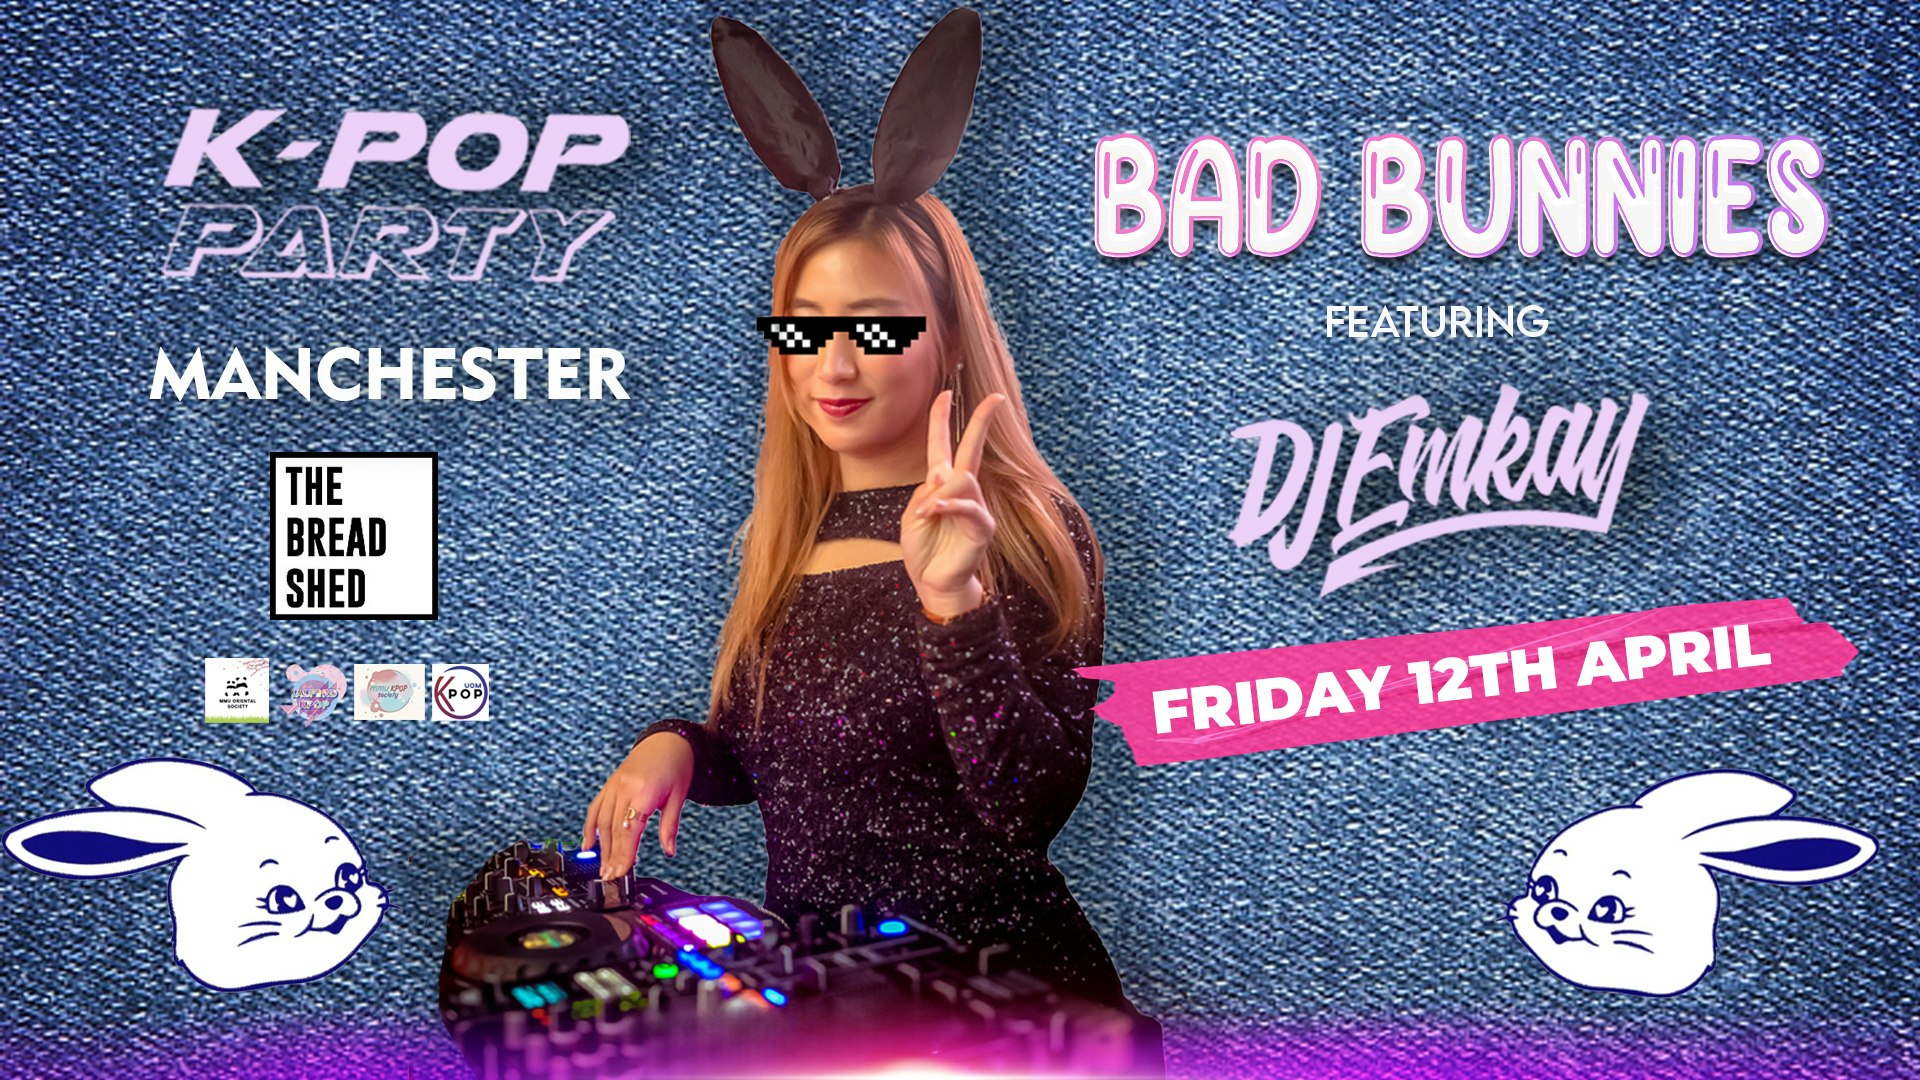 K-Pop BAD BUNNIES Party Manchester with DJ EMKAY | Friday 12th April